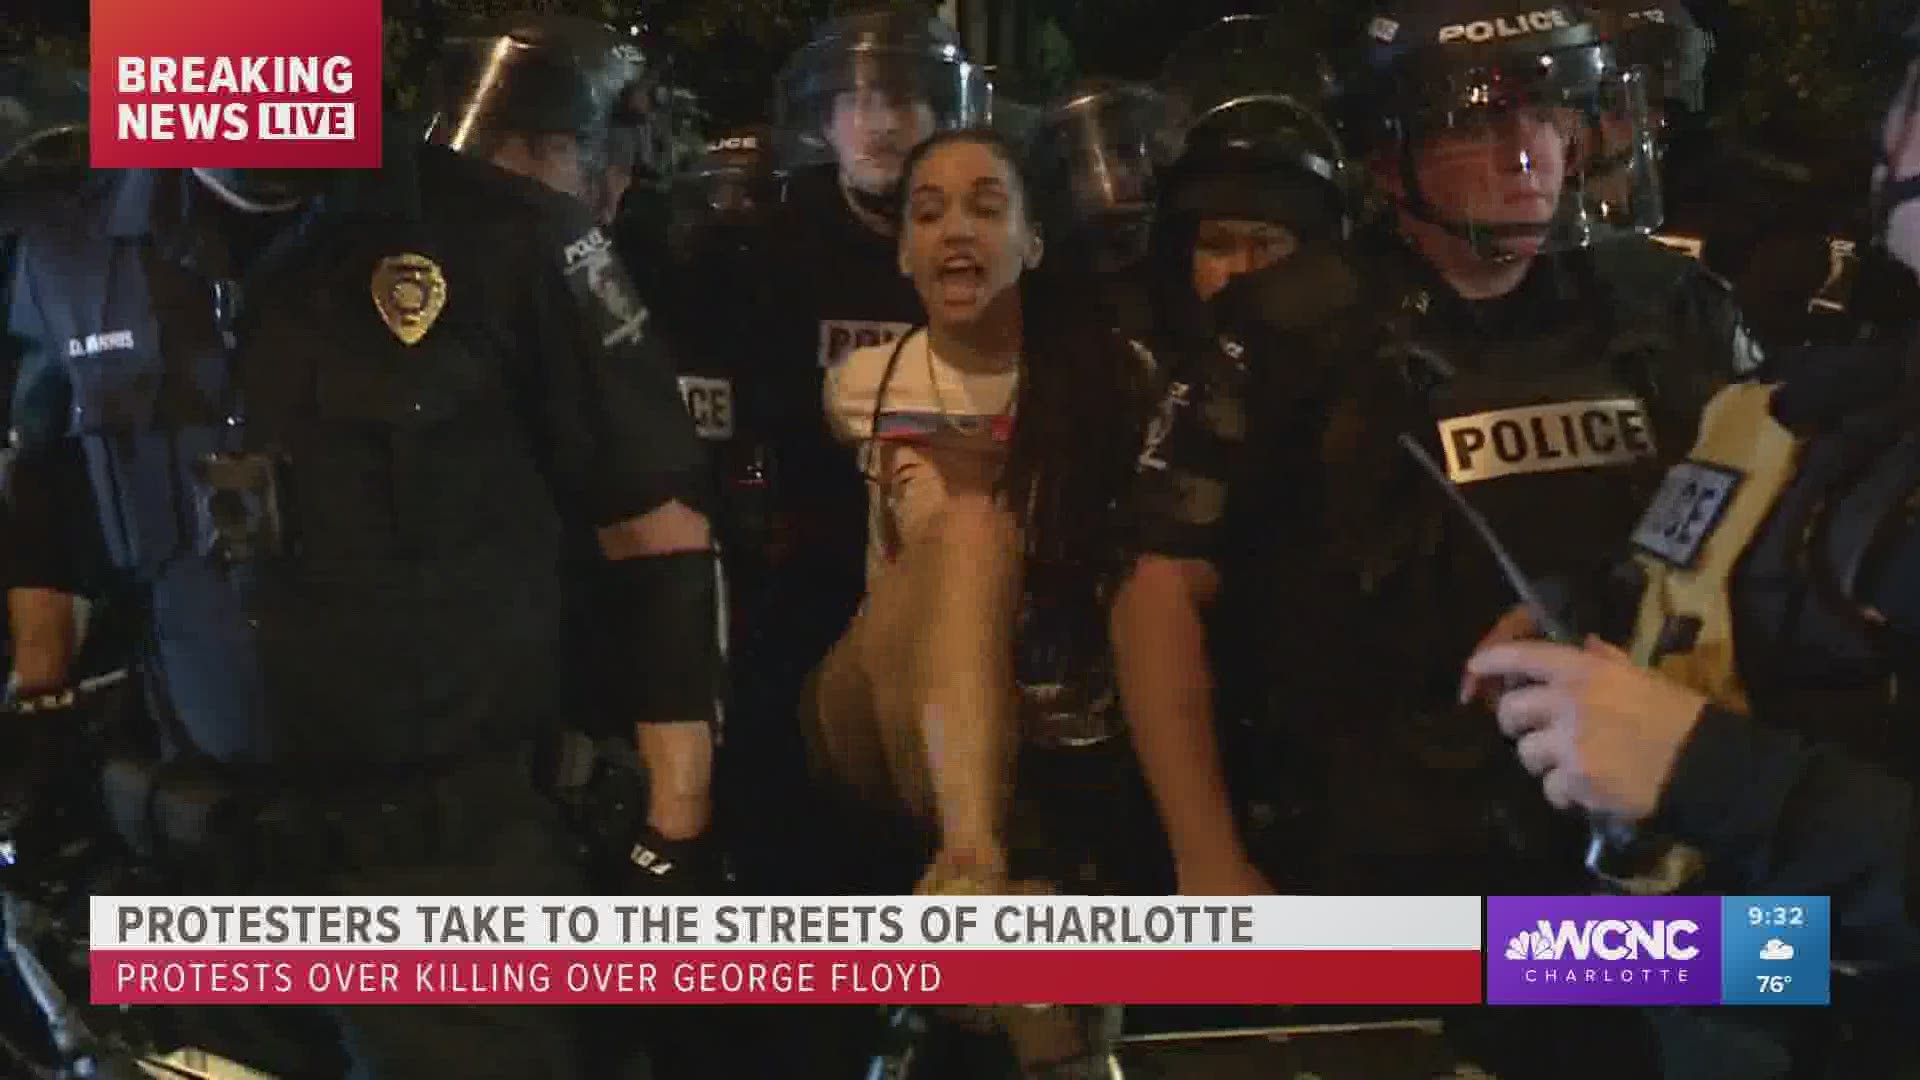 Among protests outside CMPD headquarters, a woman was taken into custody for possession of a conceal weapon, Charlotte Mecklenburg Police Department said.